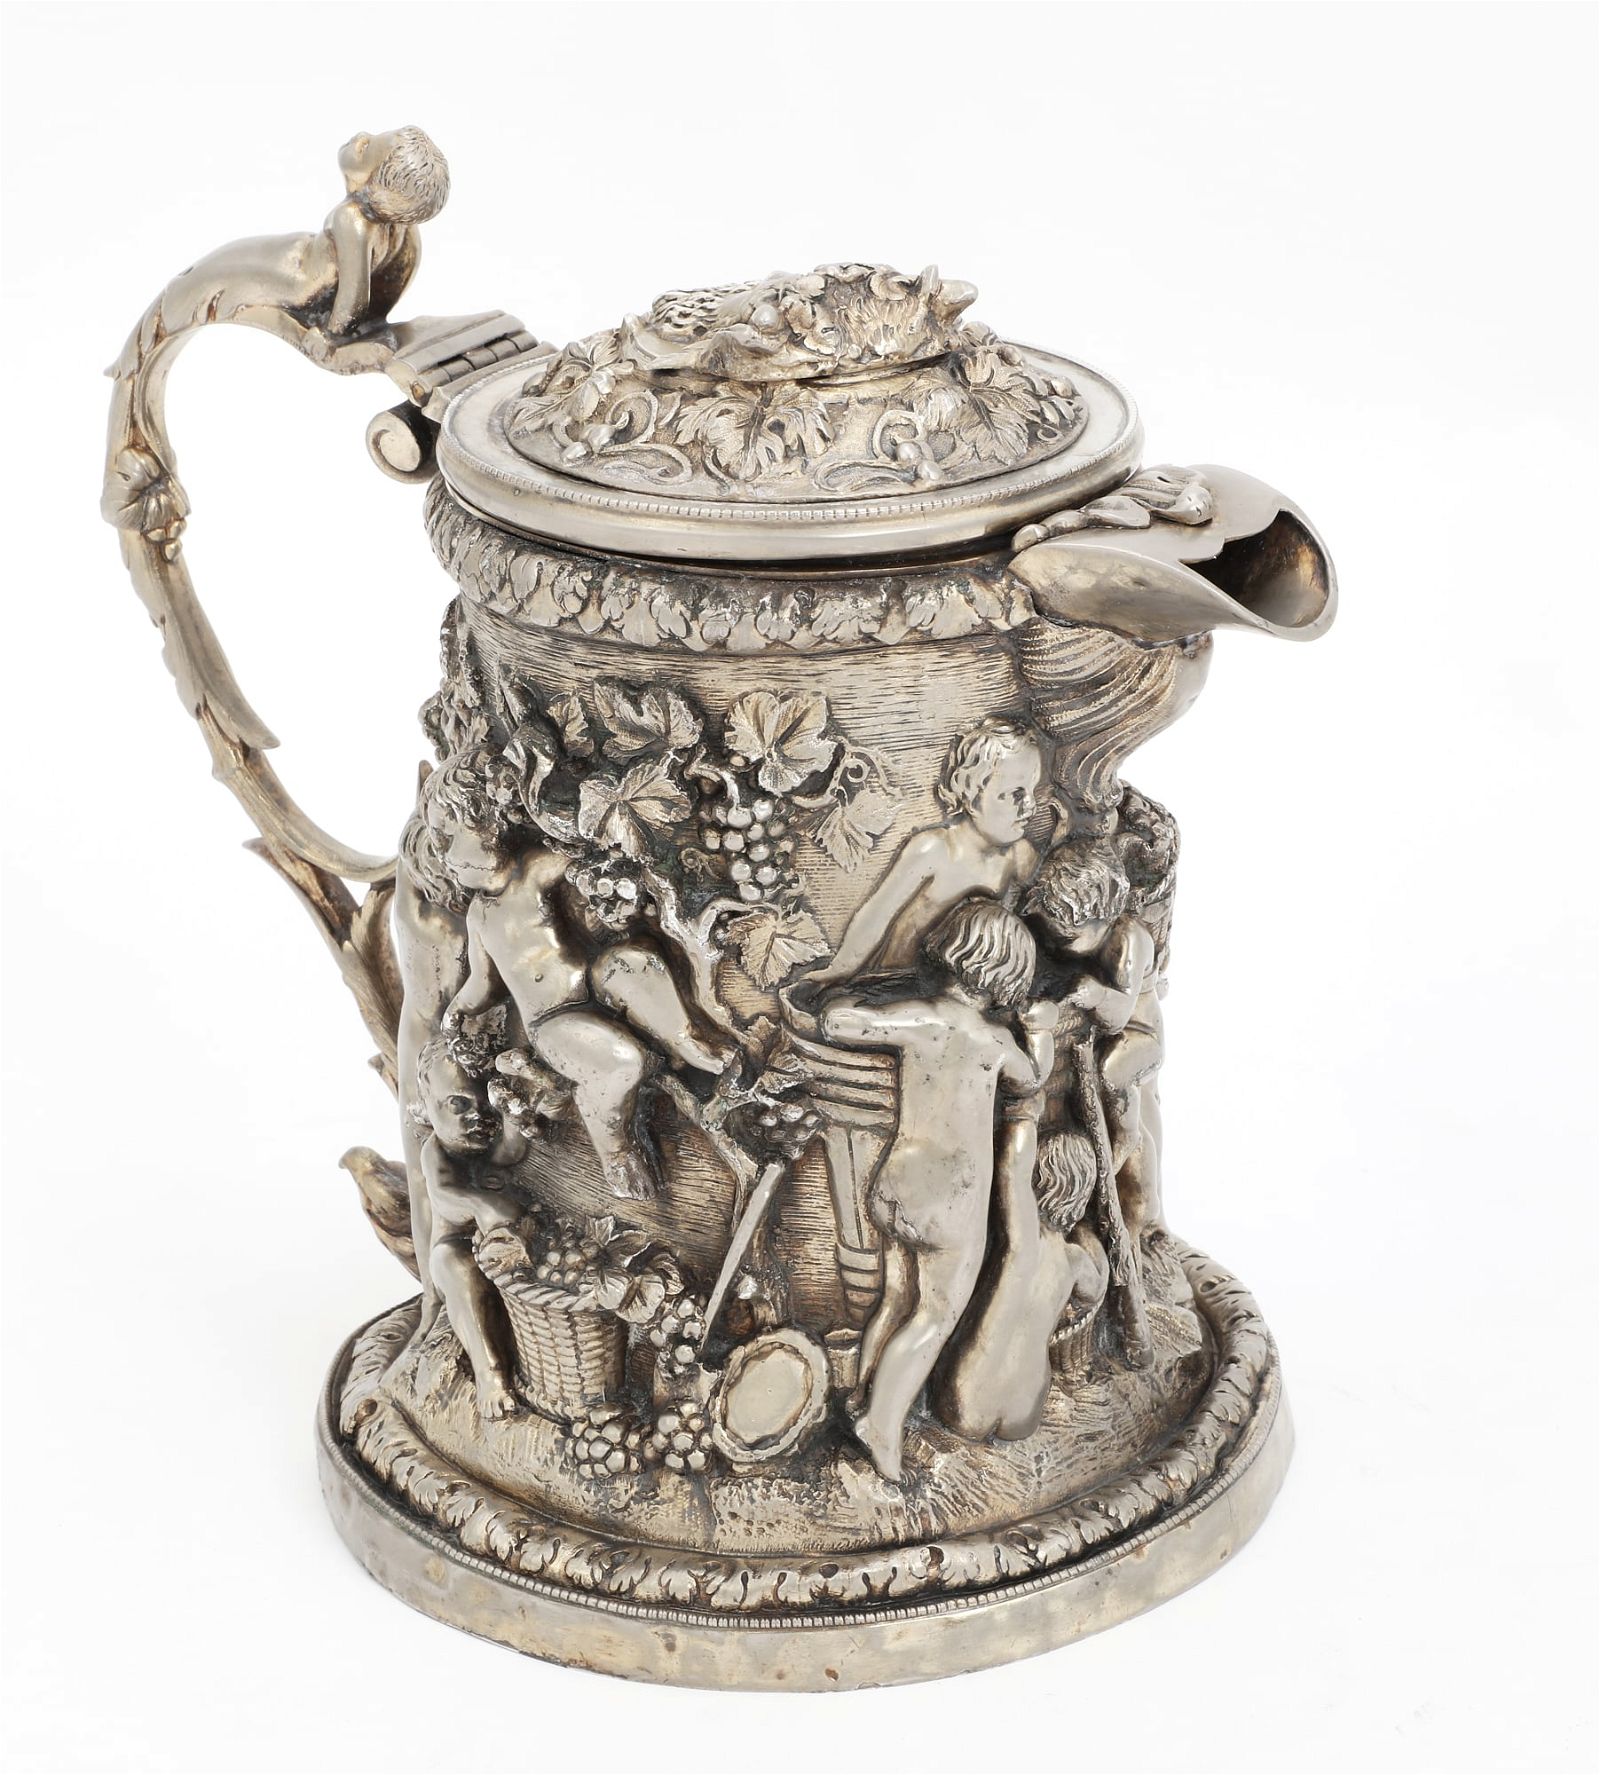 A CONTINENTAL BAROQUE STYLE METALWARE